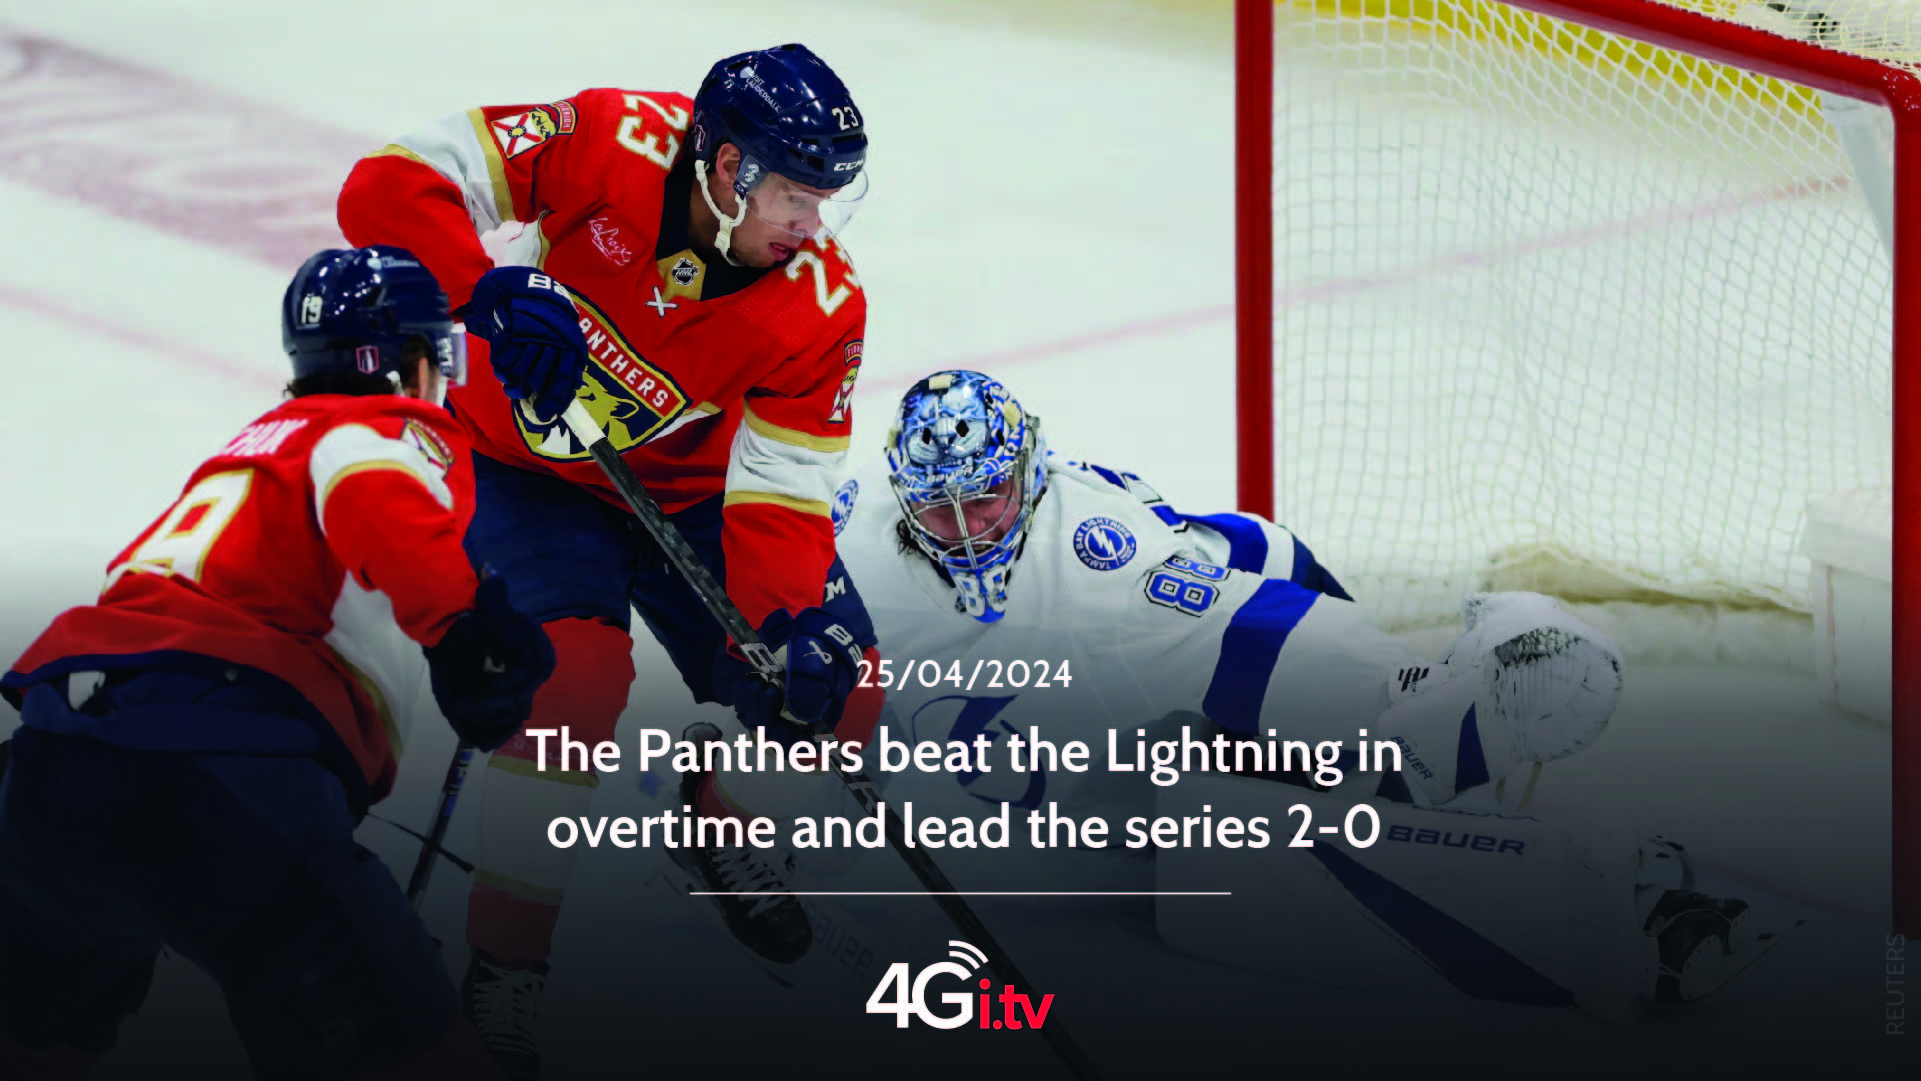 Подробнее о статье The Panthers beat the Lightning in overtime and lead the series 2-0